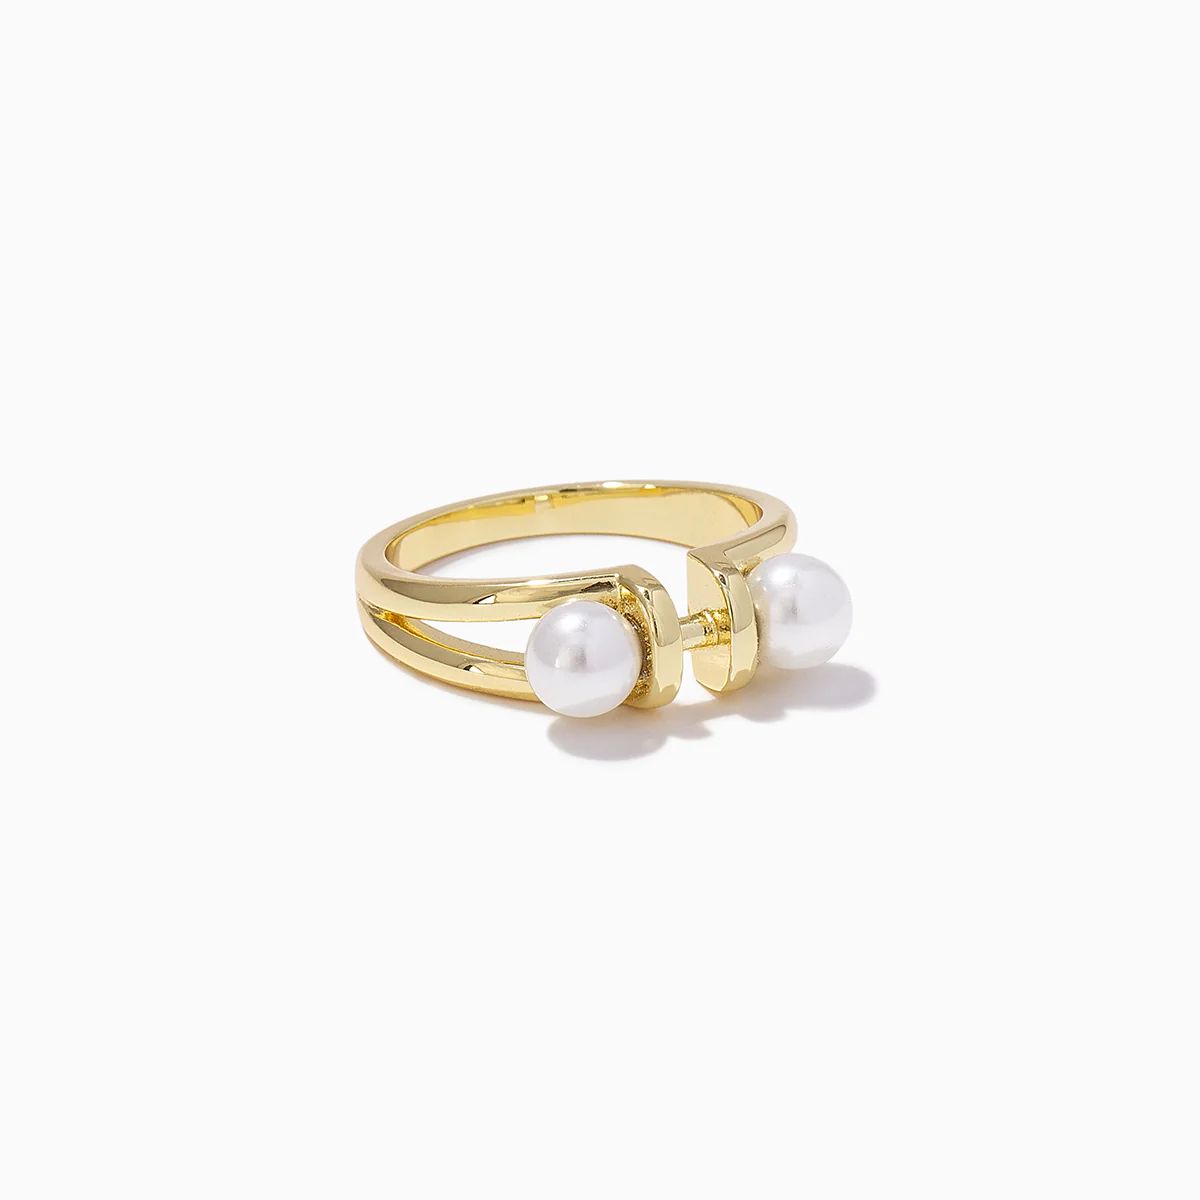 Caged Pearl Ring | Uncommon James